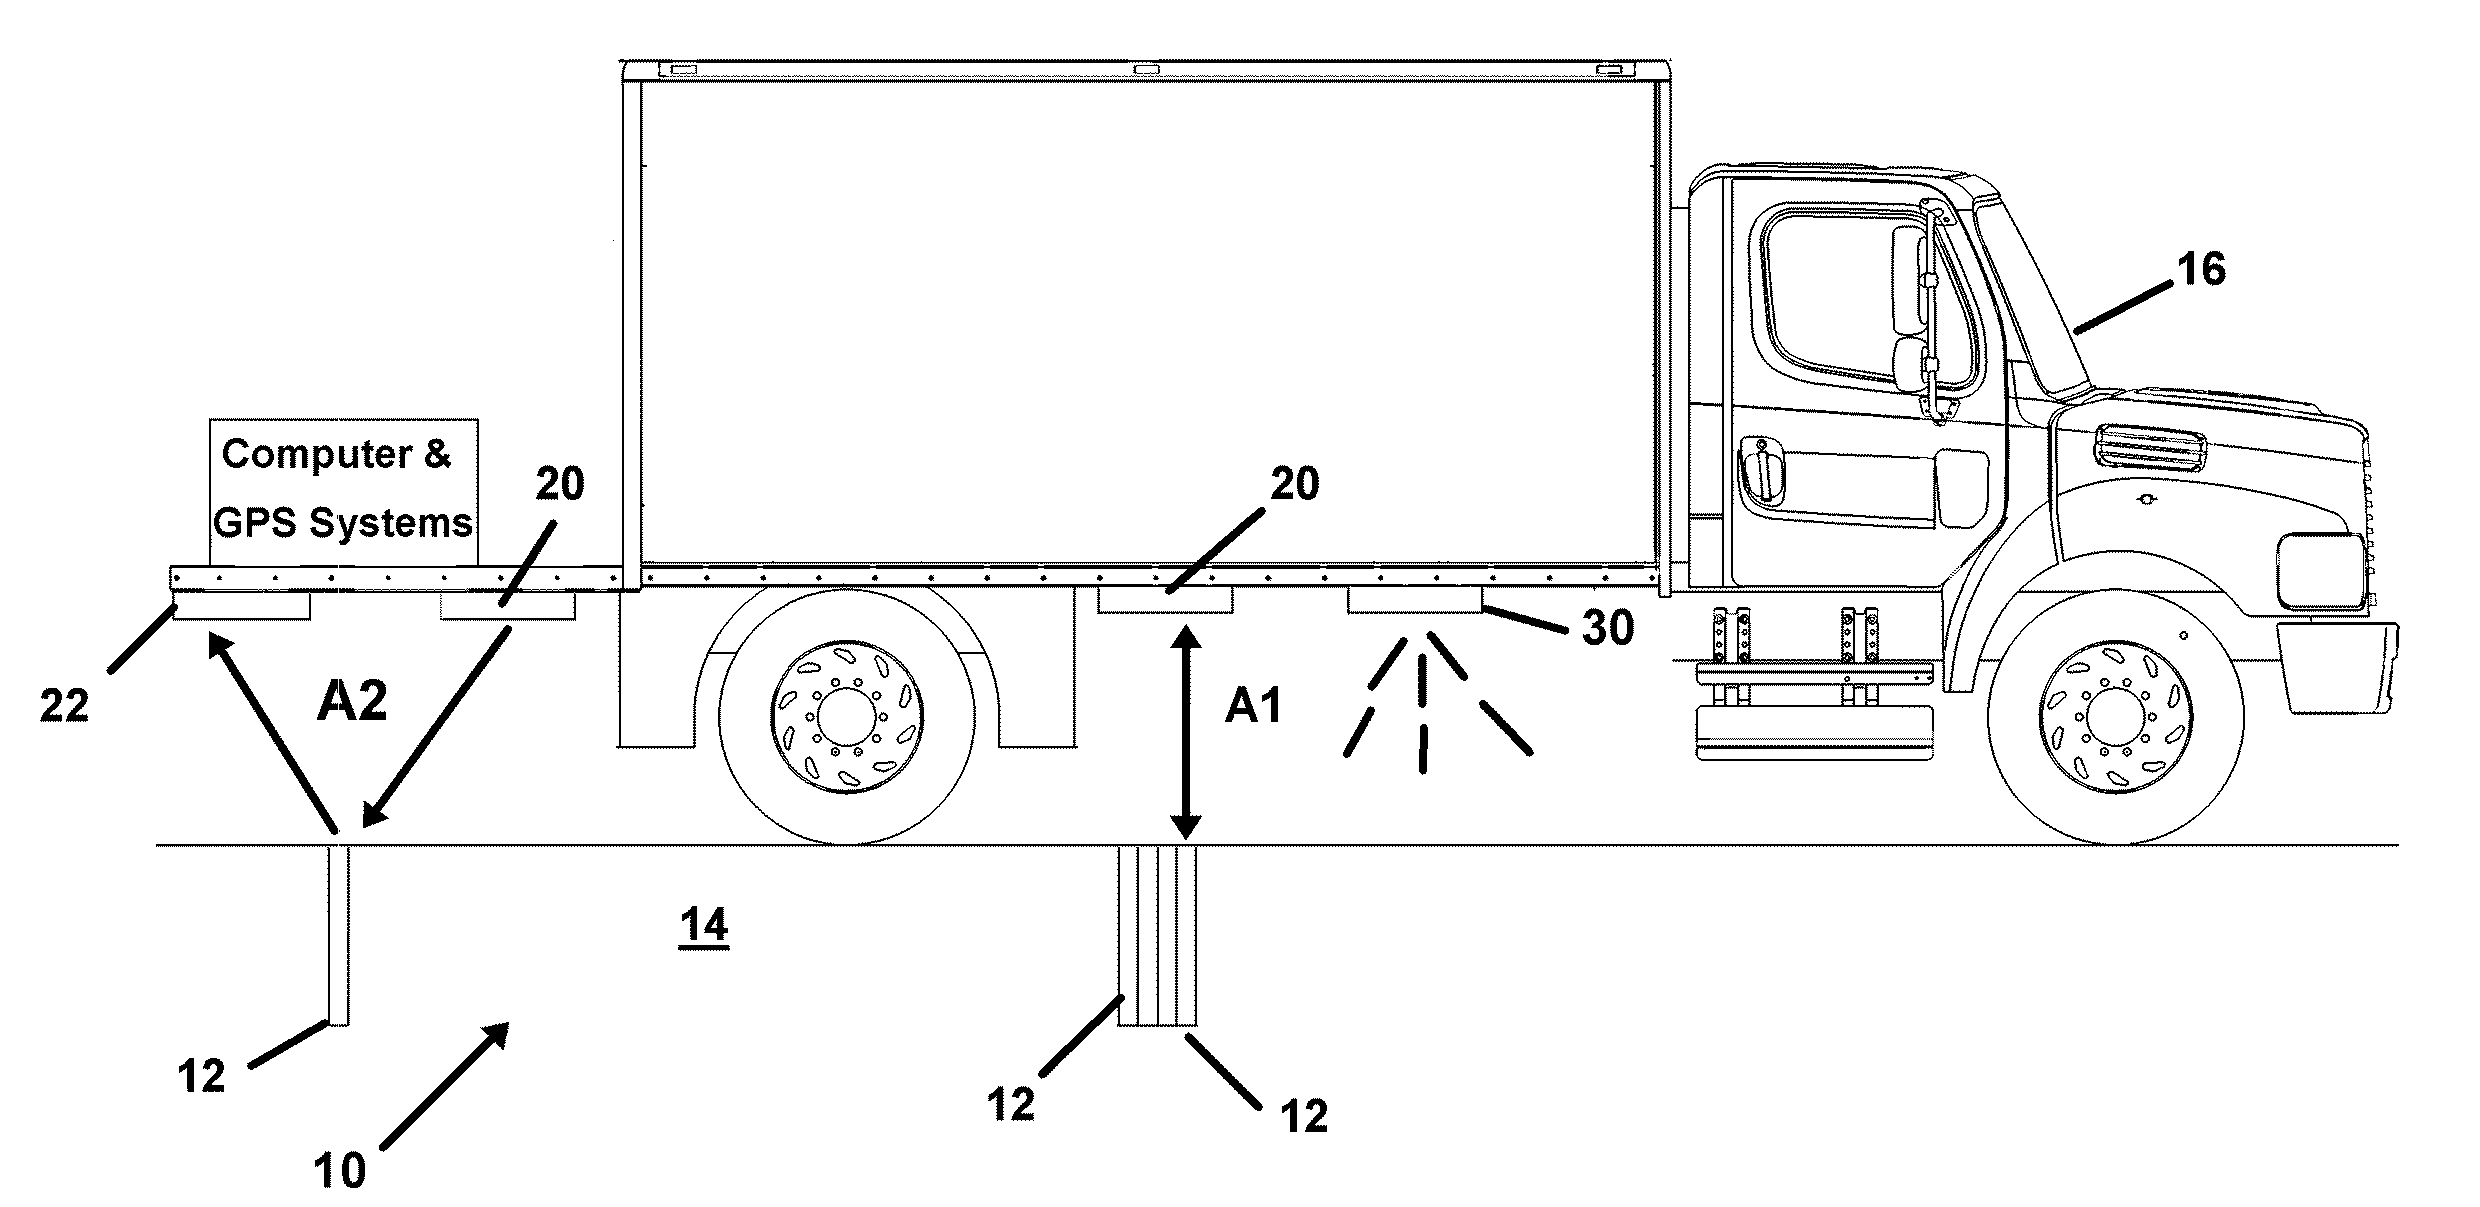 Device and Method to Evaluate Condition of Concrete Roadways Employing a Radar-based Sensing and Data Acquisition System